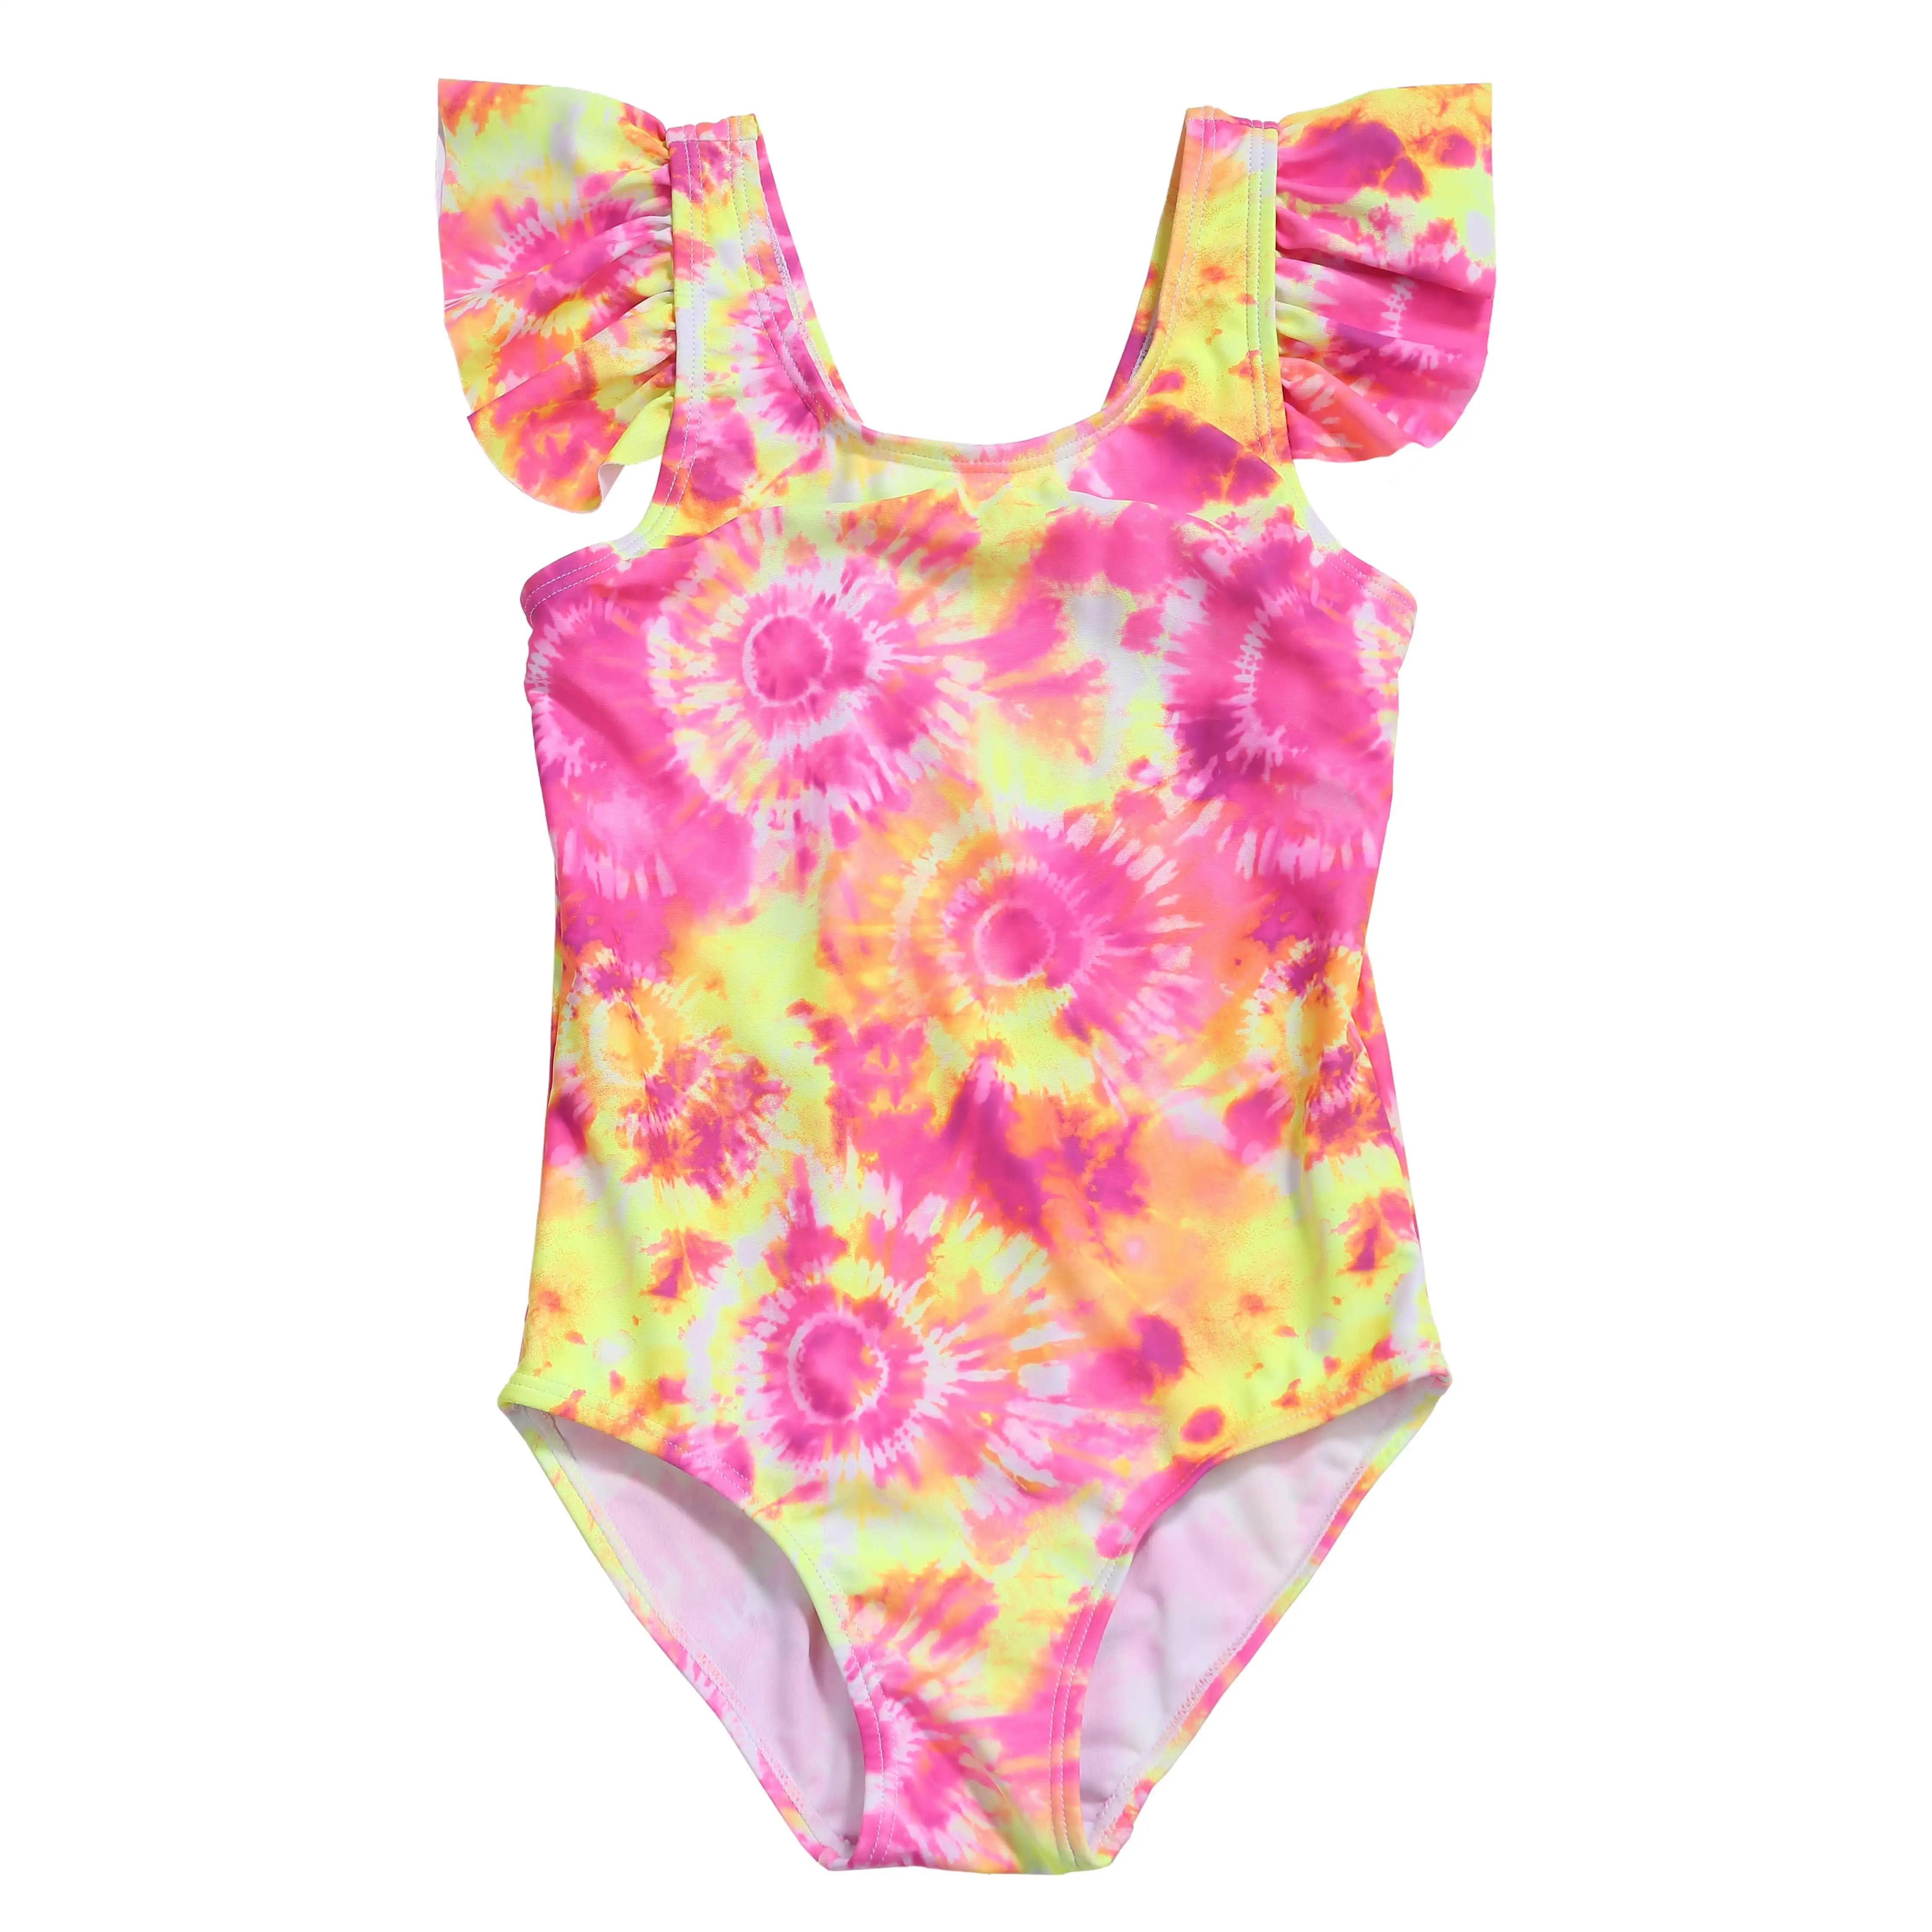 Hot sales pink camouflage color child swimsuit little girls swimsuits kids girls ruffled swimwear